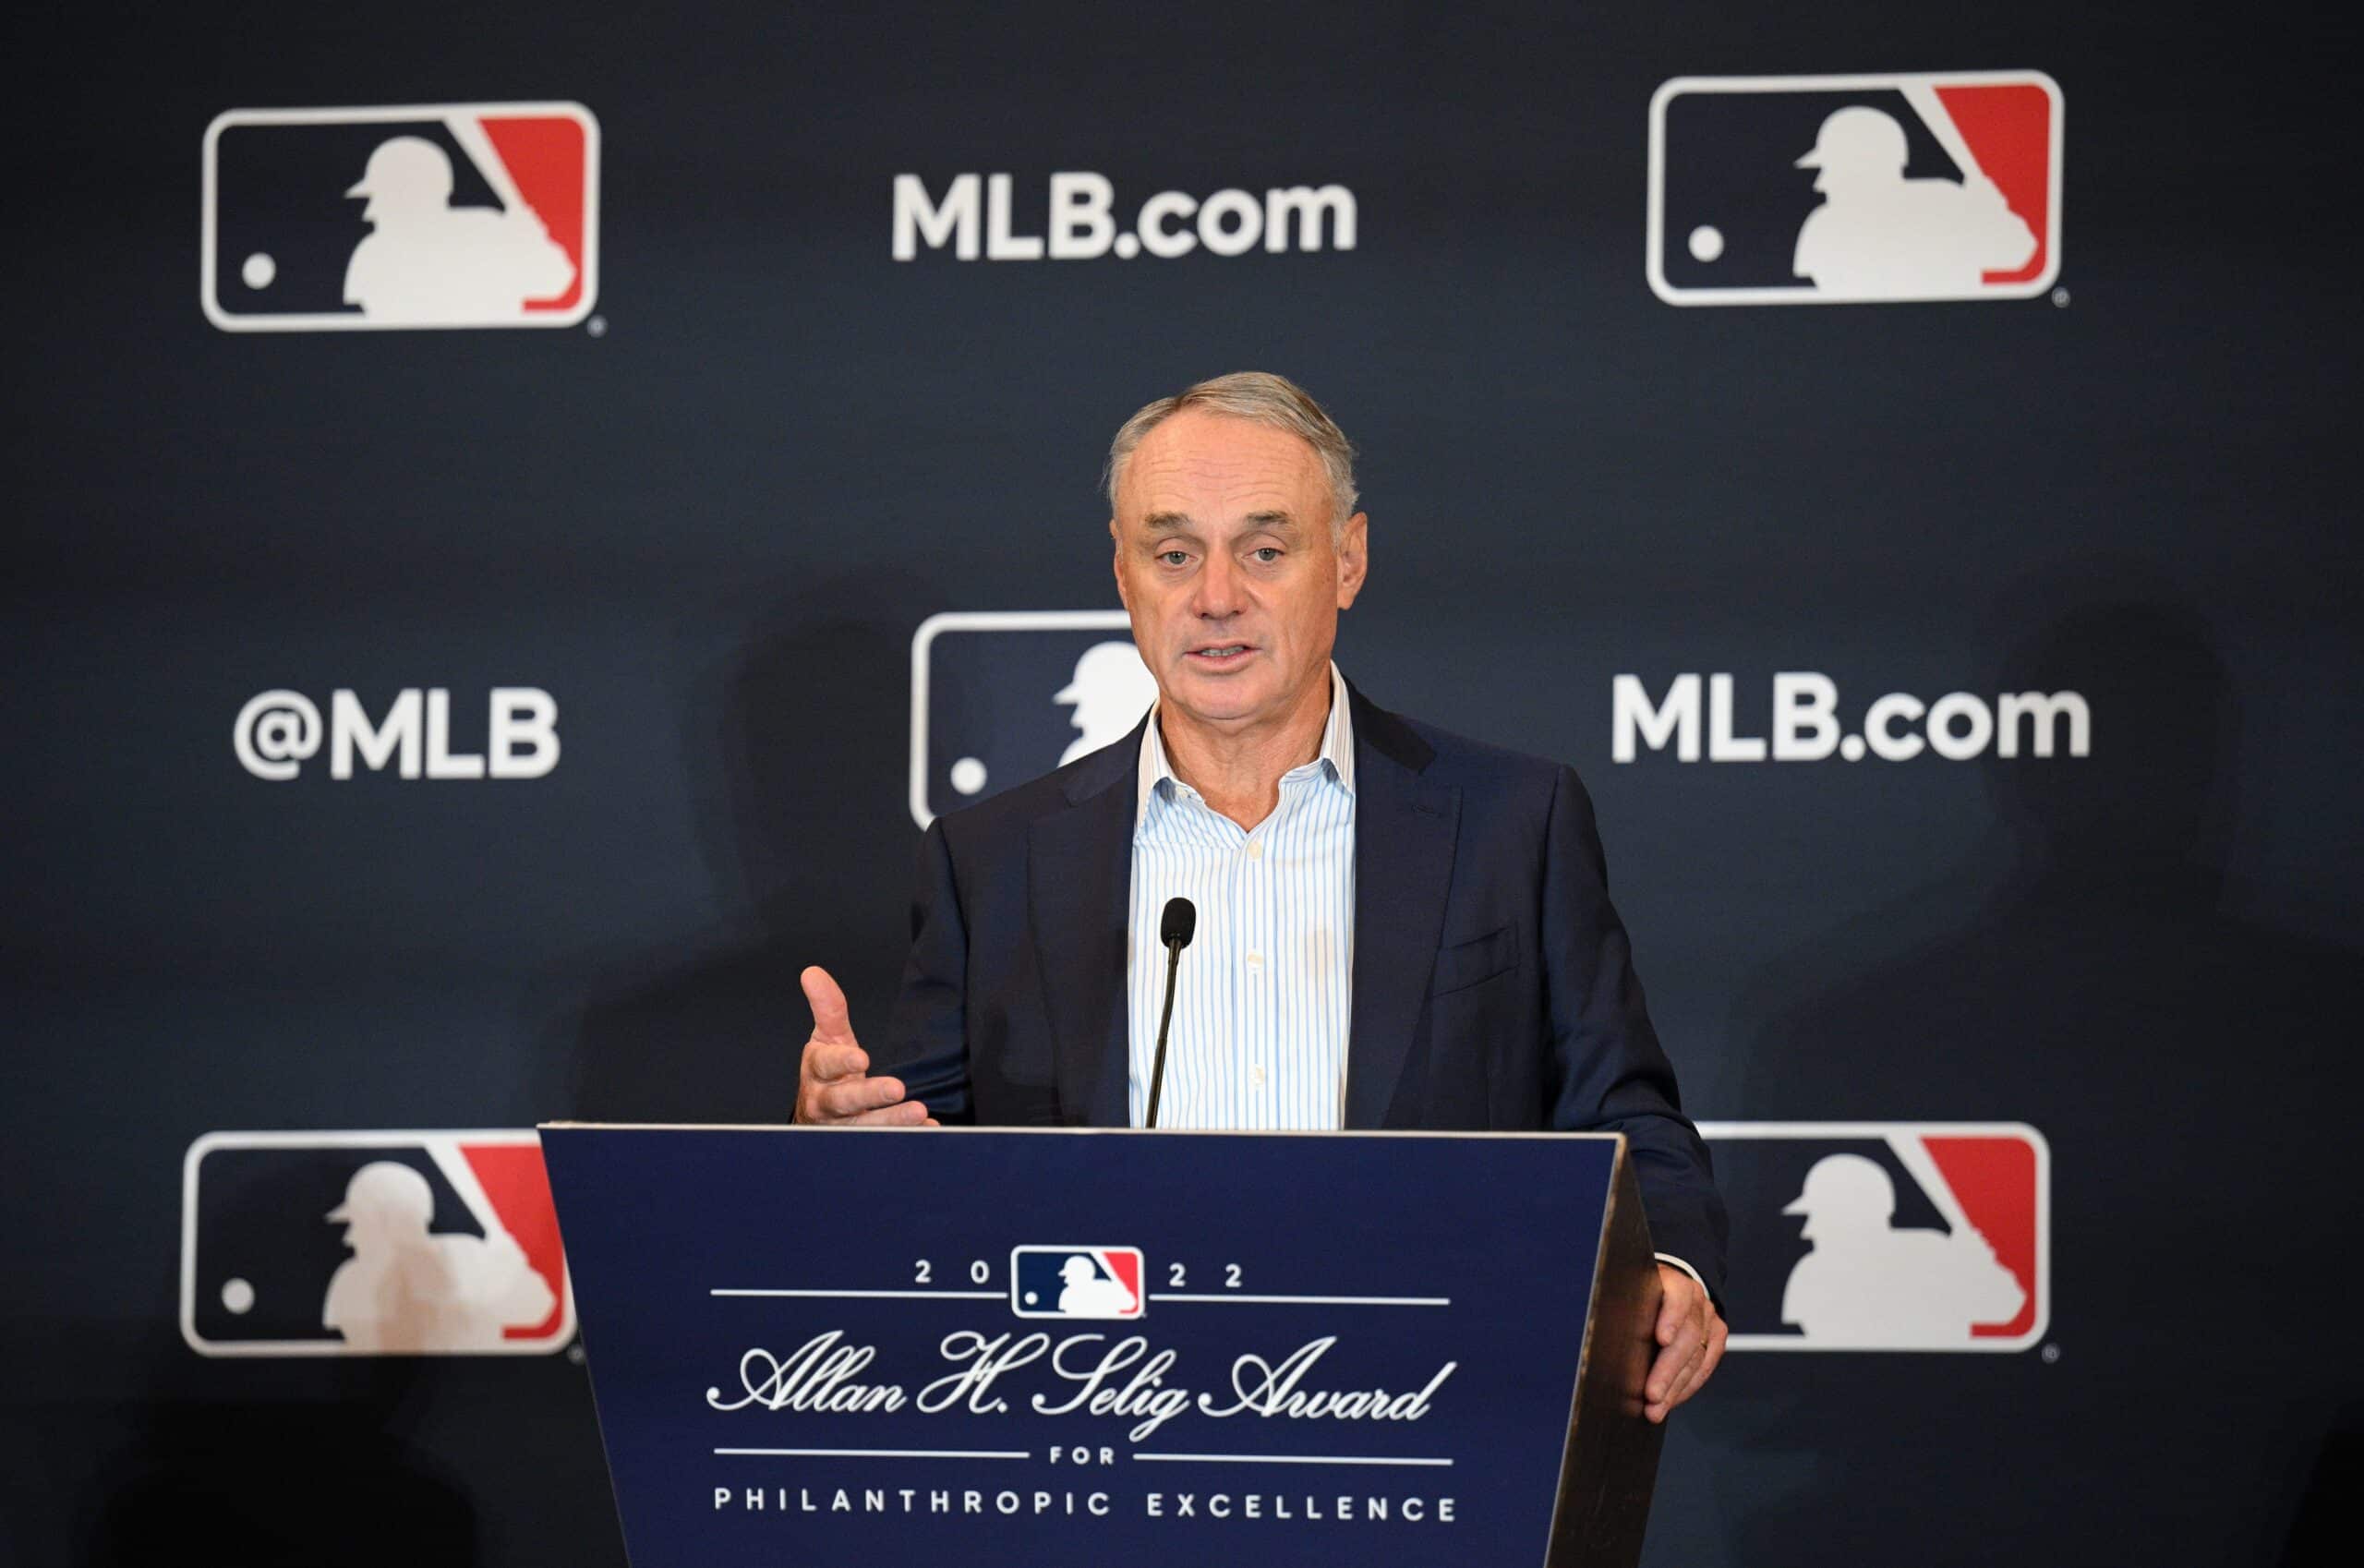 Rob Manfred Says Athletics Have Work to Do on Las Vegas Deal - The